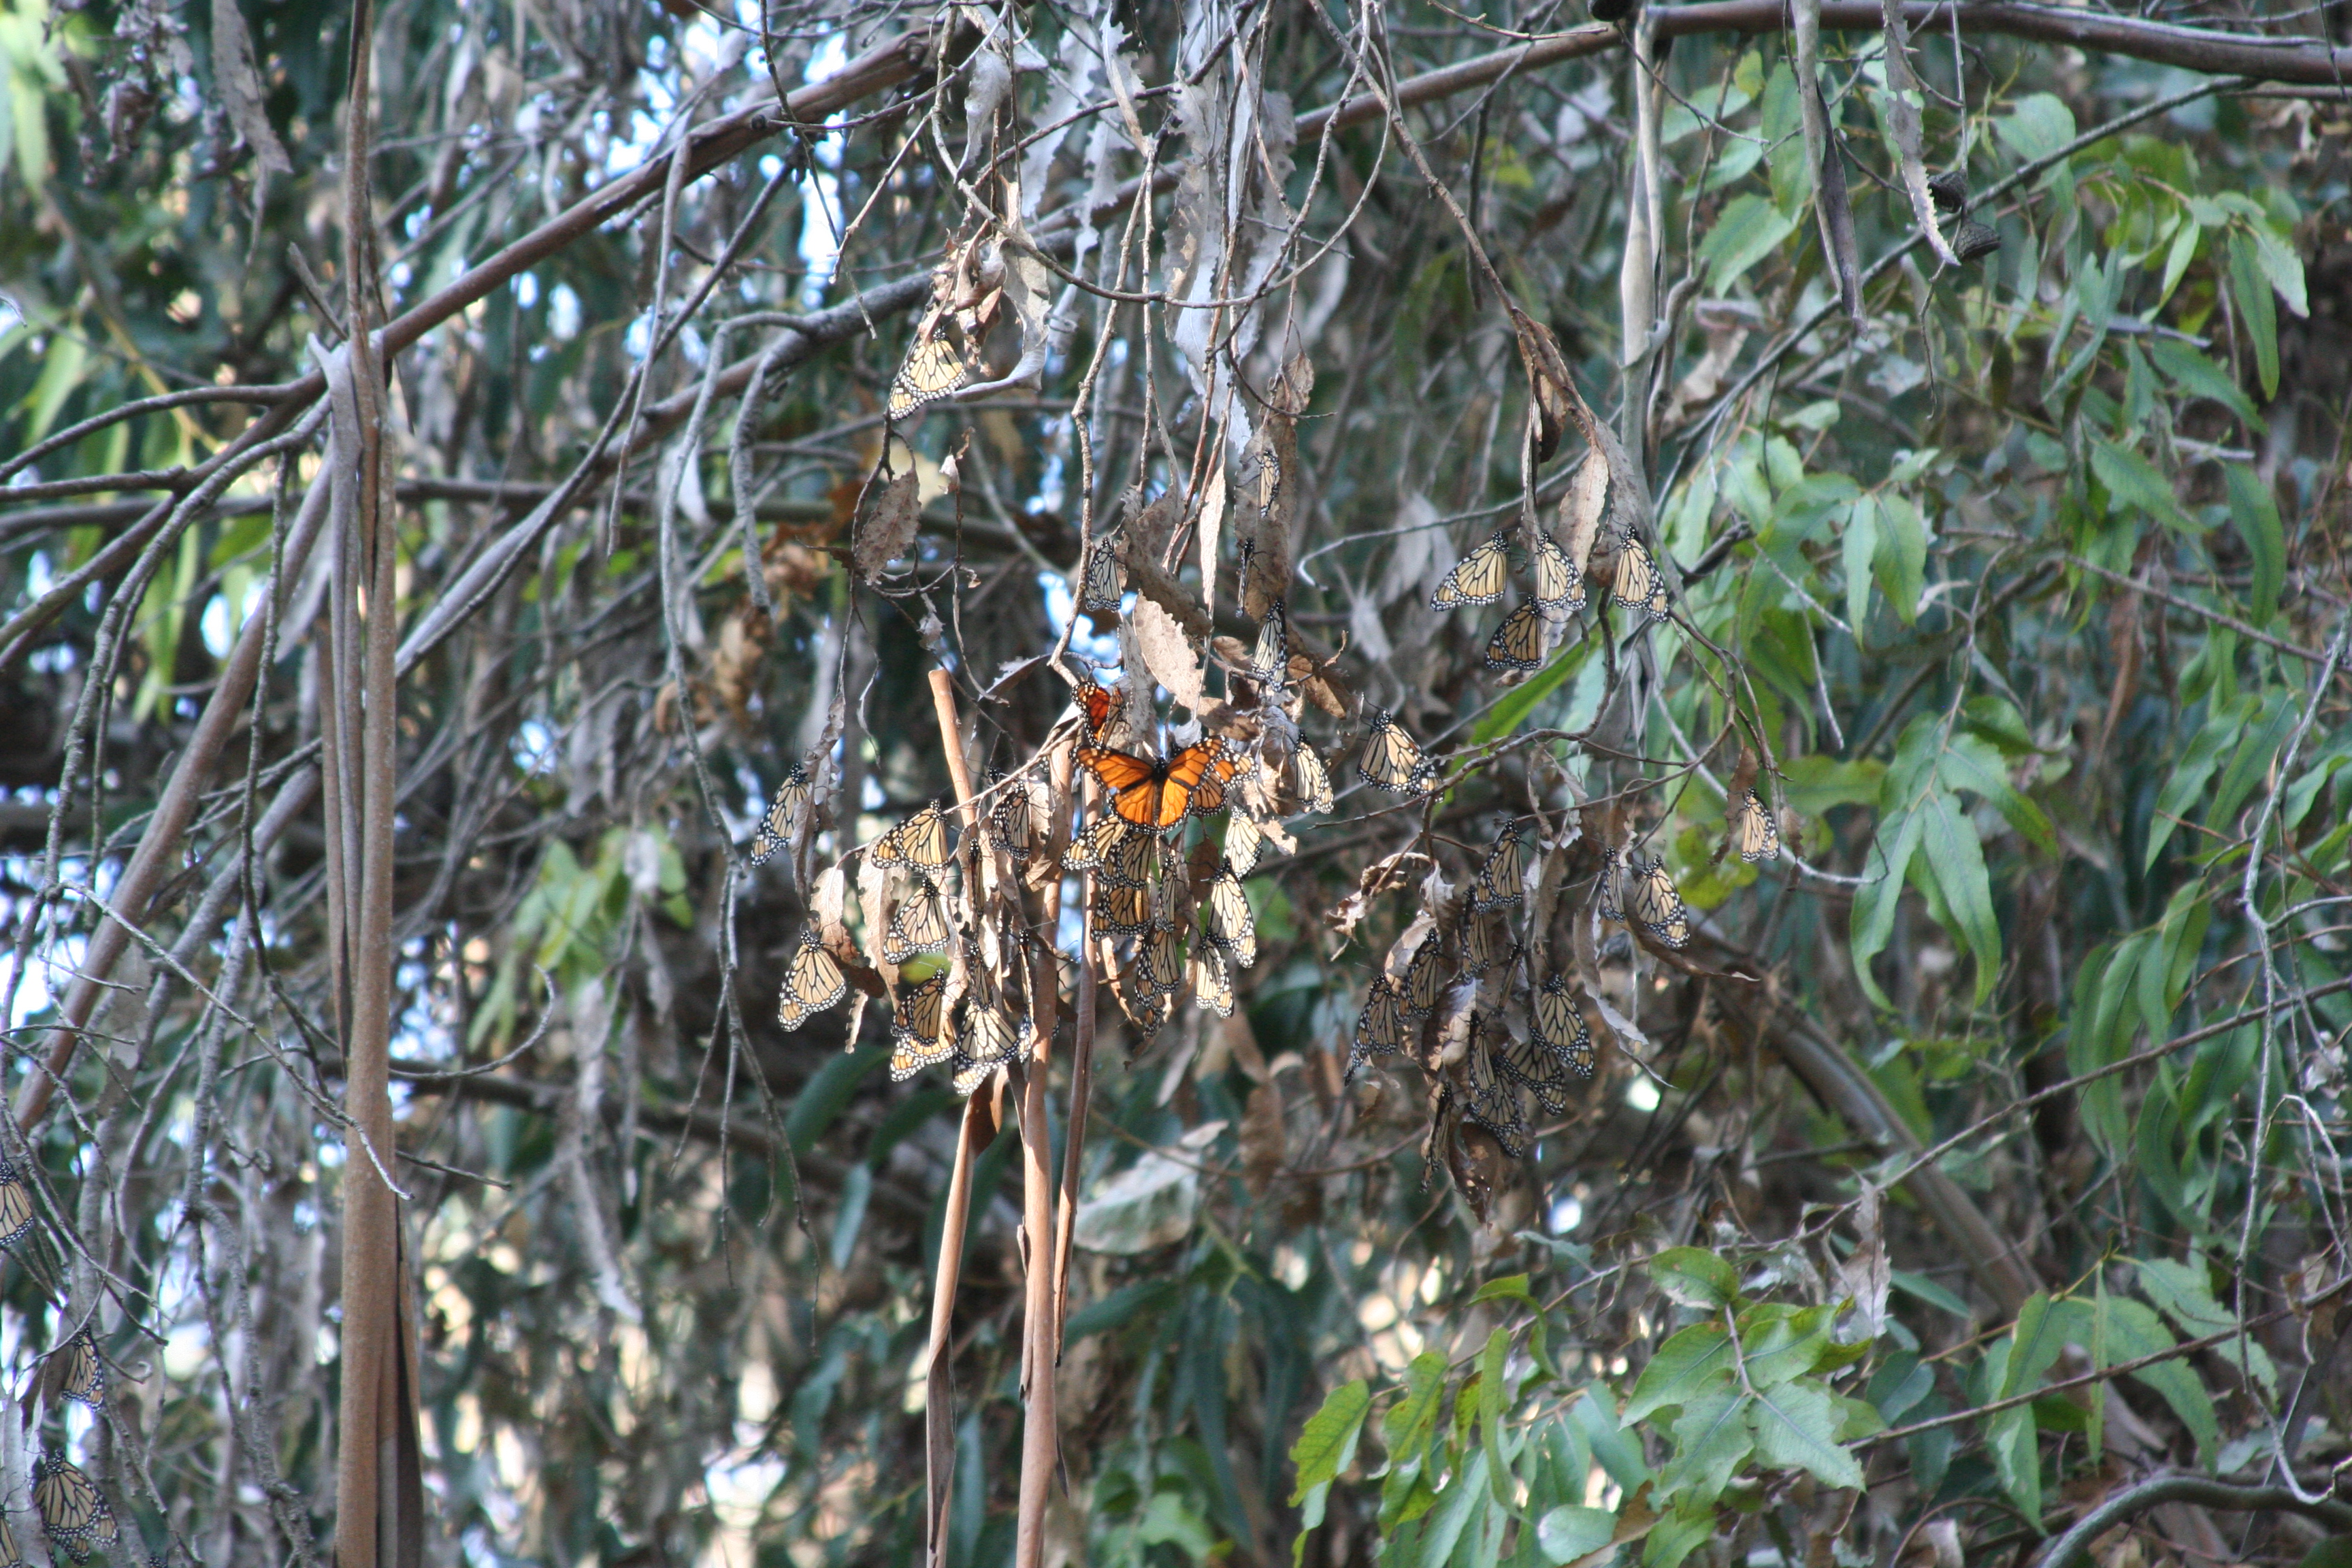 A small group of monarchs--most with their wings closed, making them look duller in color and more like dead leaves--cluster on a branch.